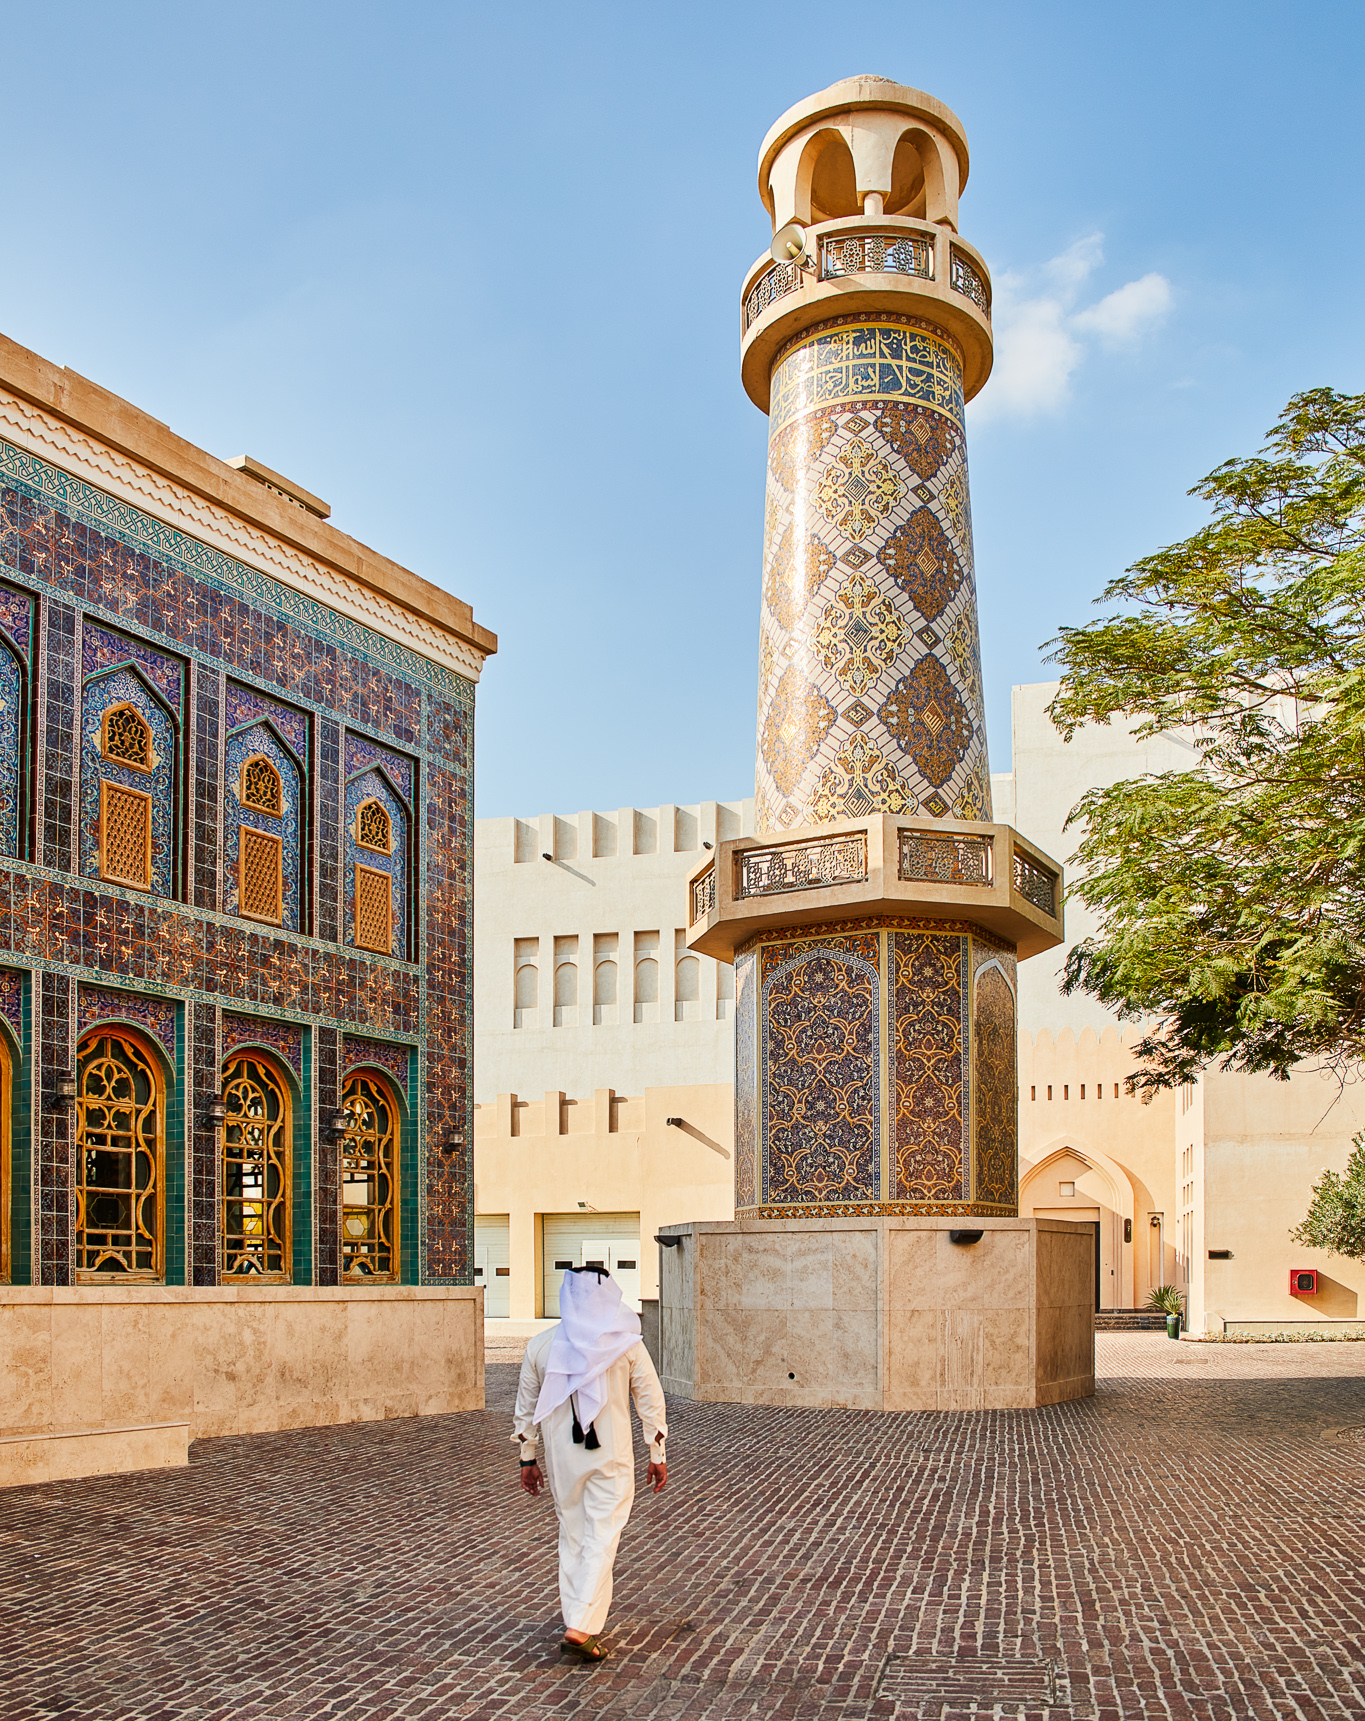 A person walks away from the camera across cobbled stone. On their left is a two-storey building with marble and tile decor on the exterior walls. Decorative screens cover the windows on the upper level. In front of the person is a round minaret with a loudspeaker attached near the top. The minaret has tile and marble decoration. Behind the minaret are buildings that are painted plainly. To the right is a leafy tree.